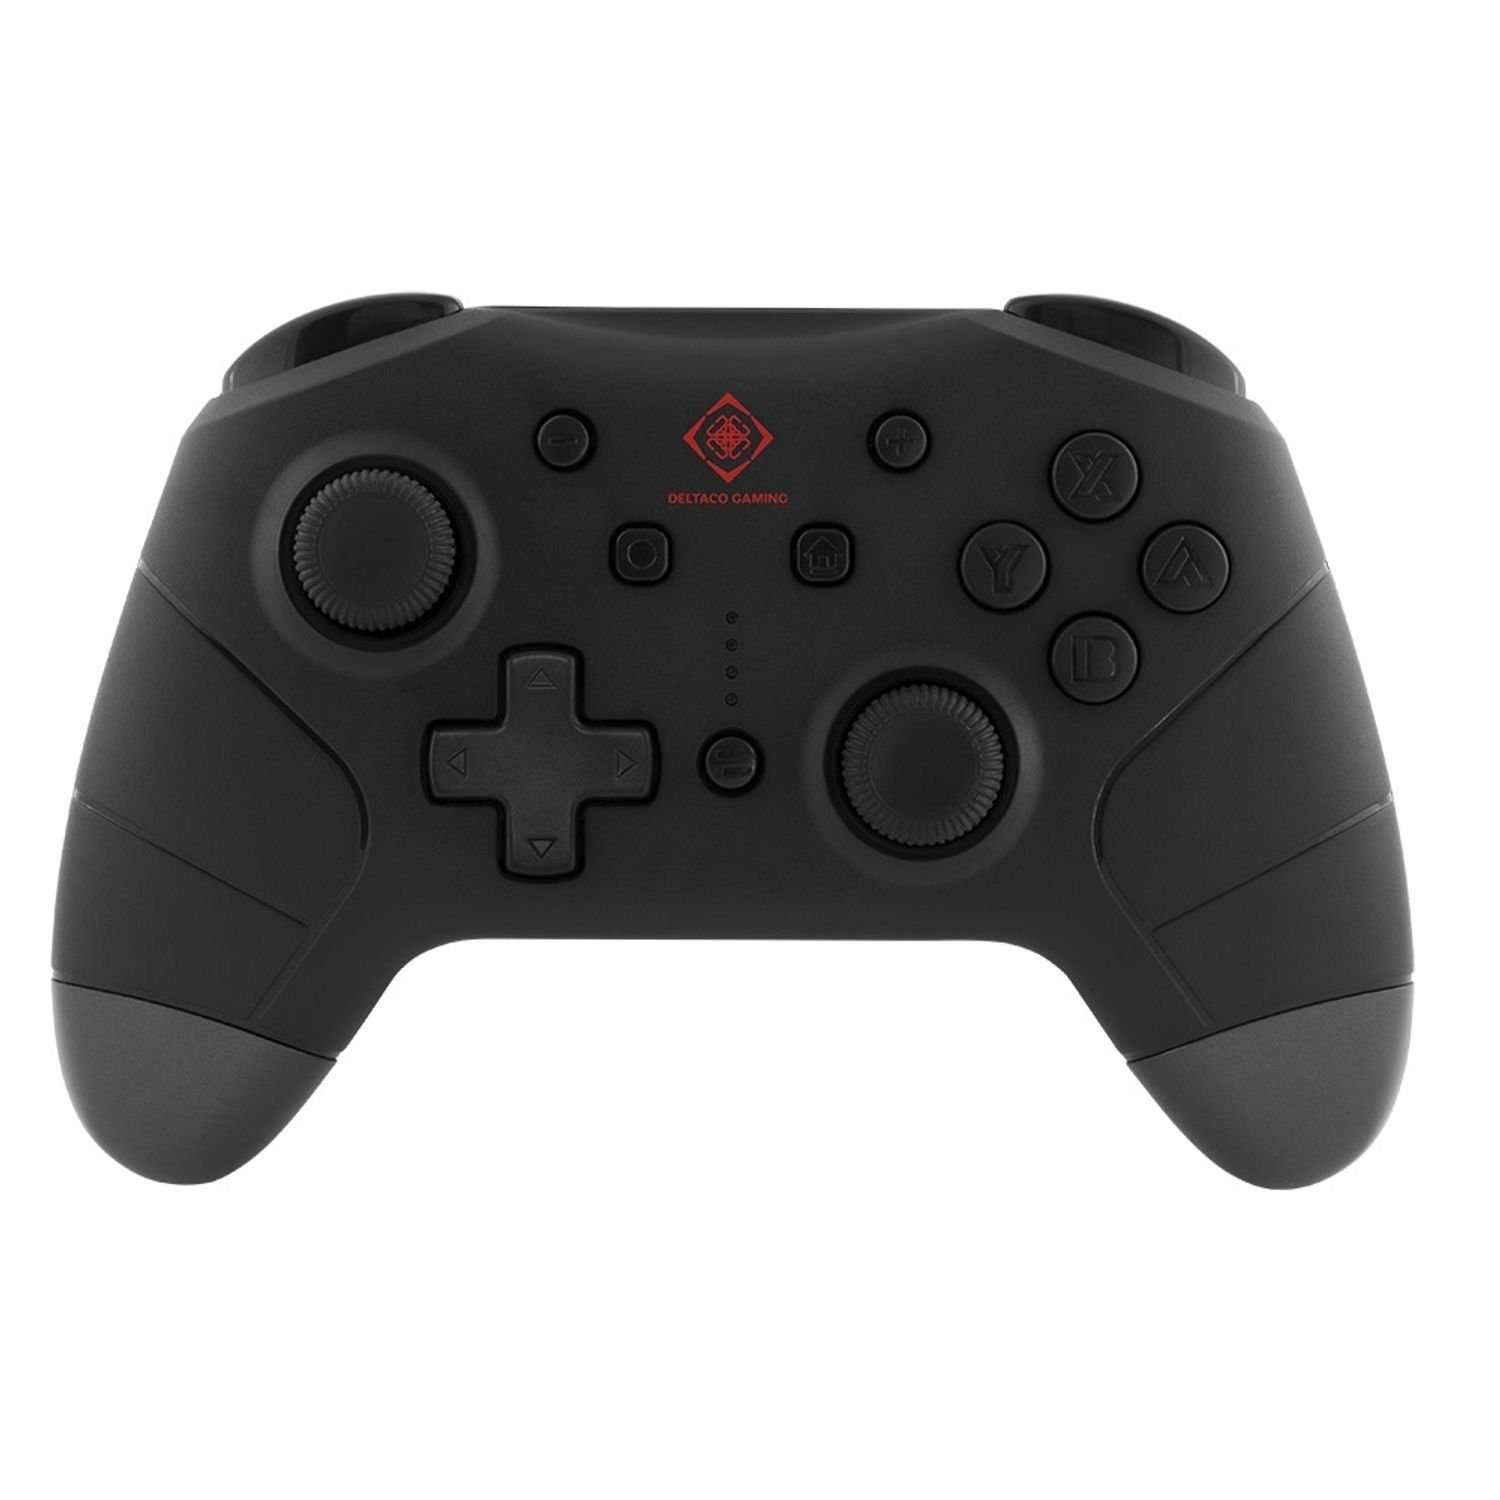 DELTACO »GAMING Nintendo Switch Controller (Bluetooth, PC / Android,  ABS-Kunststoff, Gamepad-Steuerung, 3D-Joysticks)« Gaming-Controller